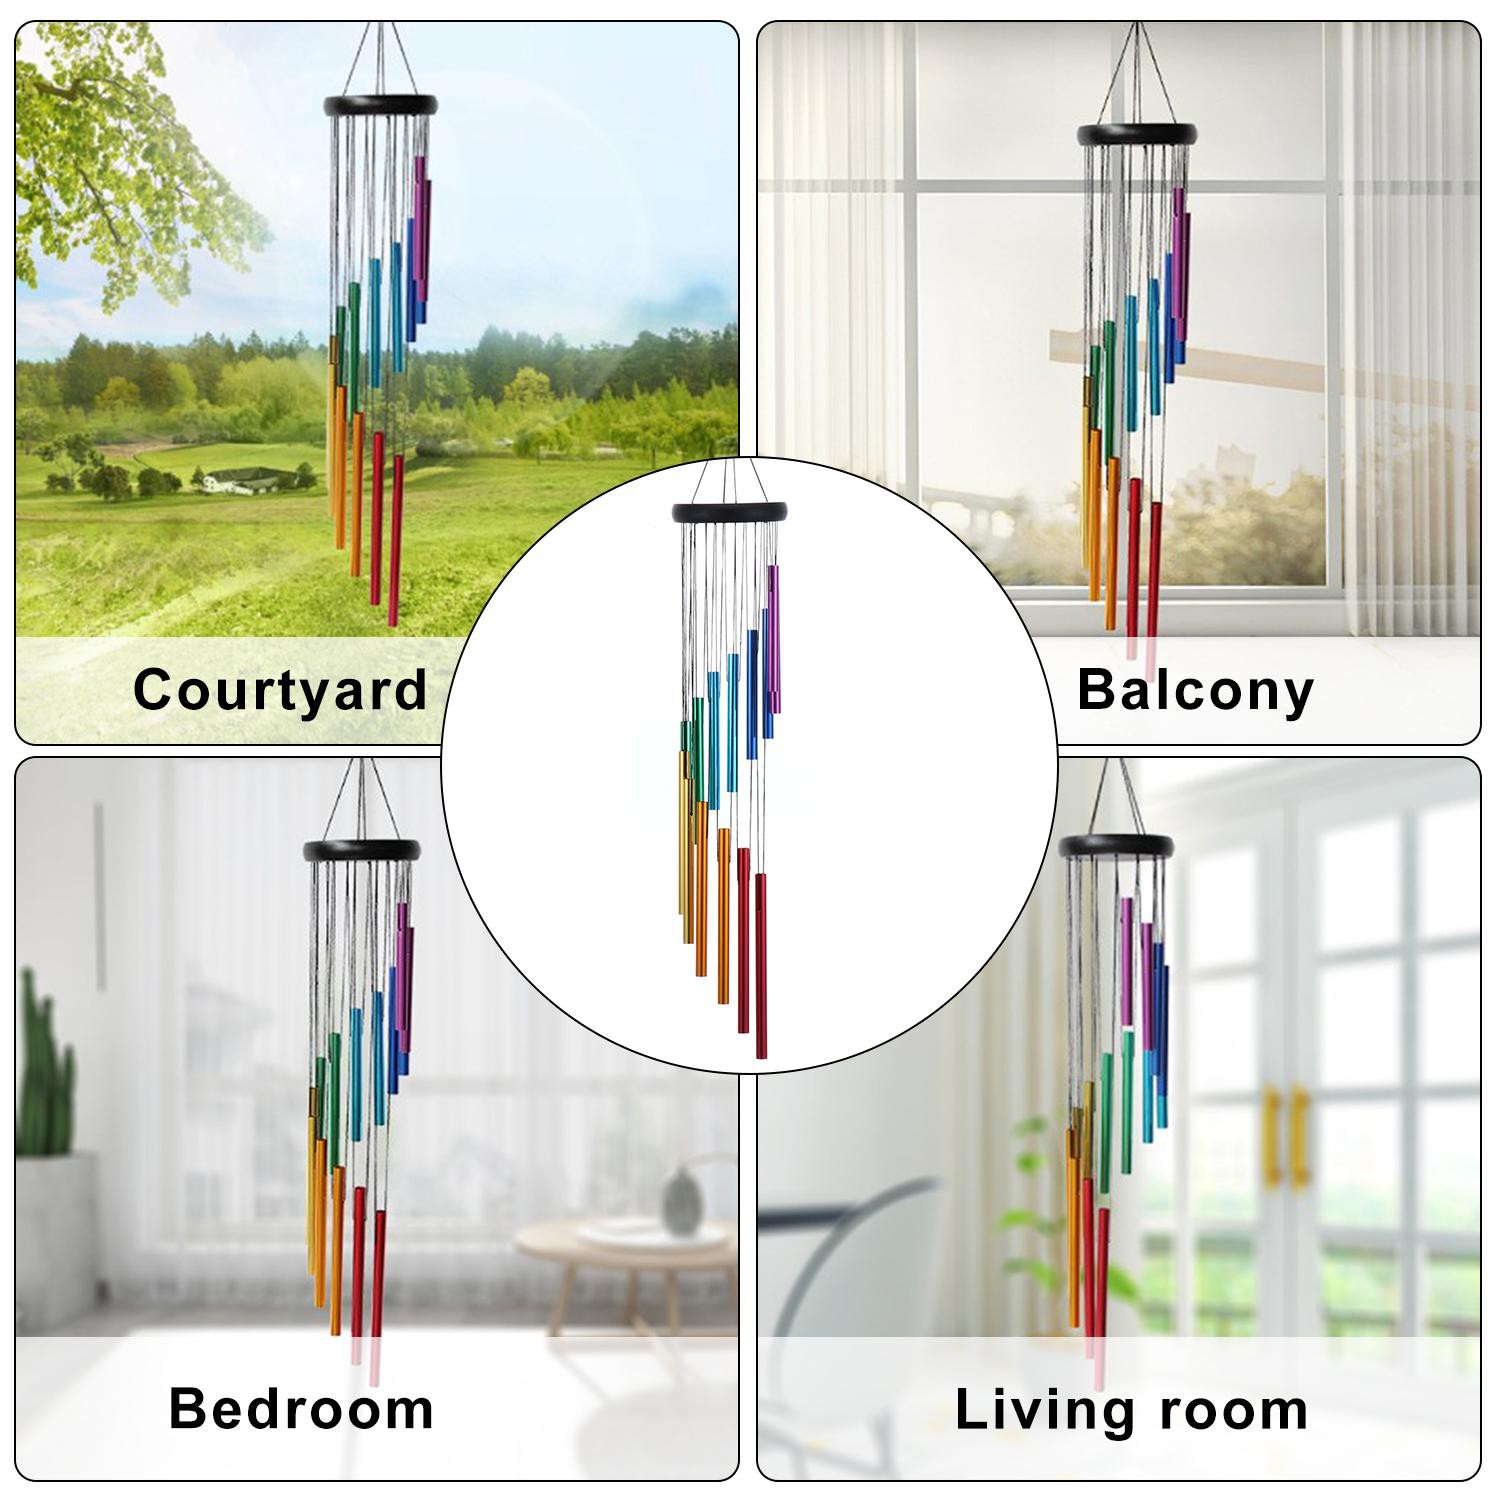 RAINBOW Outdoor Garden Colorful Wind Chimes Memorial Wind Chimes Gifts Meditation and Yoga Deep Tone Wind Chimes With Colored Aluminum Alloy Tubes Terrace decorations 7 Colors Home Decorations 14 Aluminum Tubes Decor Garden Soothing Sounds